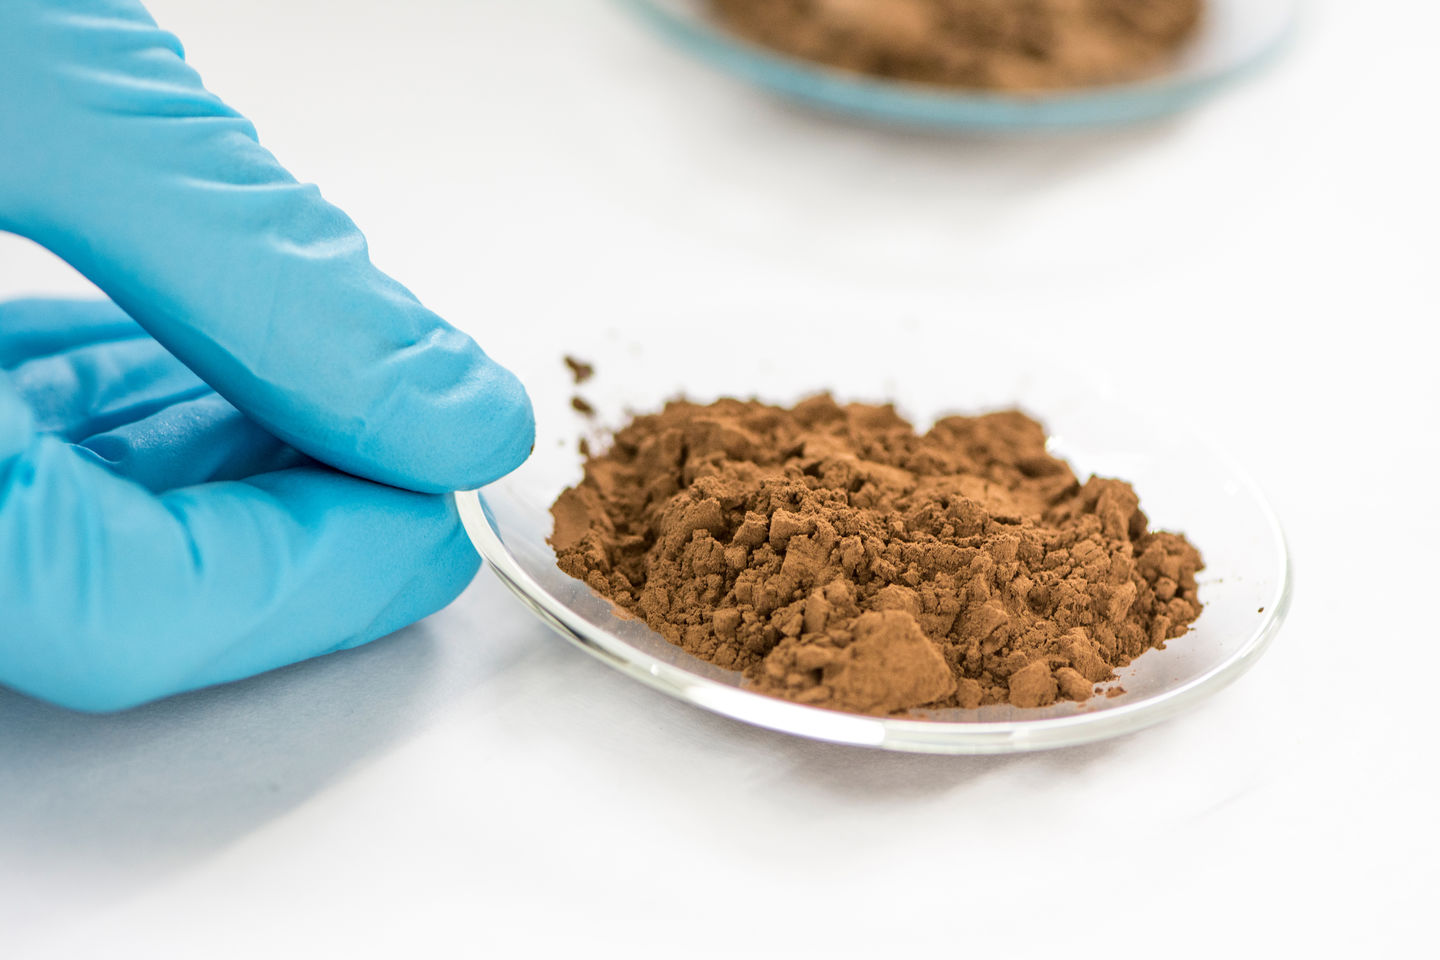 Lignin particles and samples, researcher Guillaume Riviere, photo Valeria Azovskaya 2018